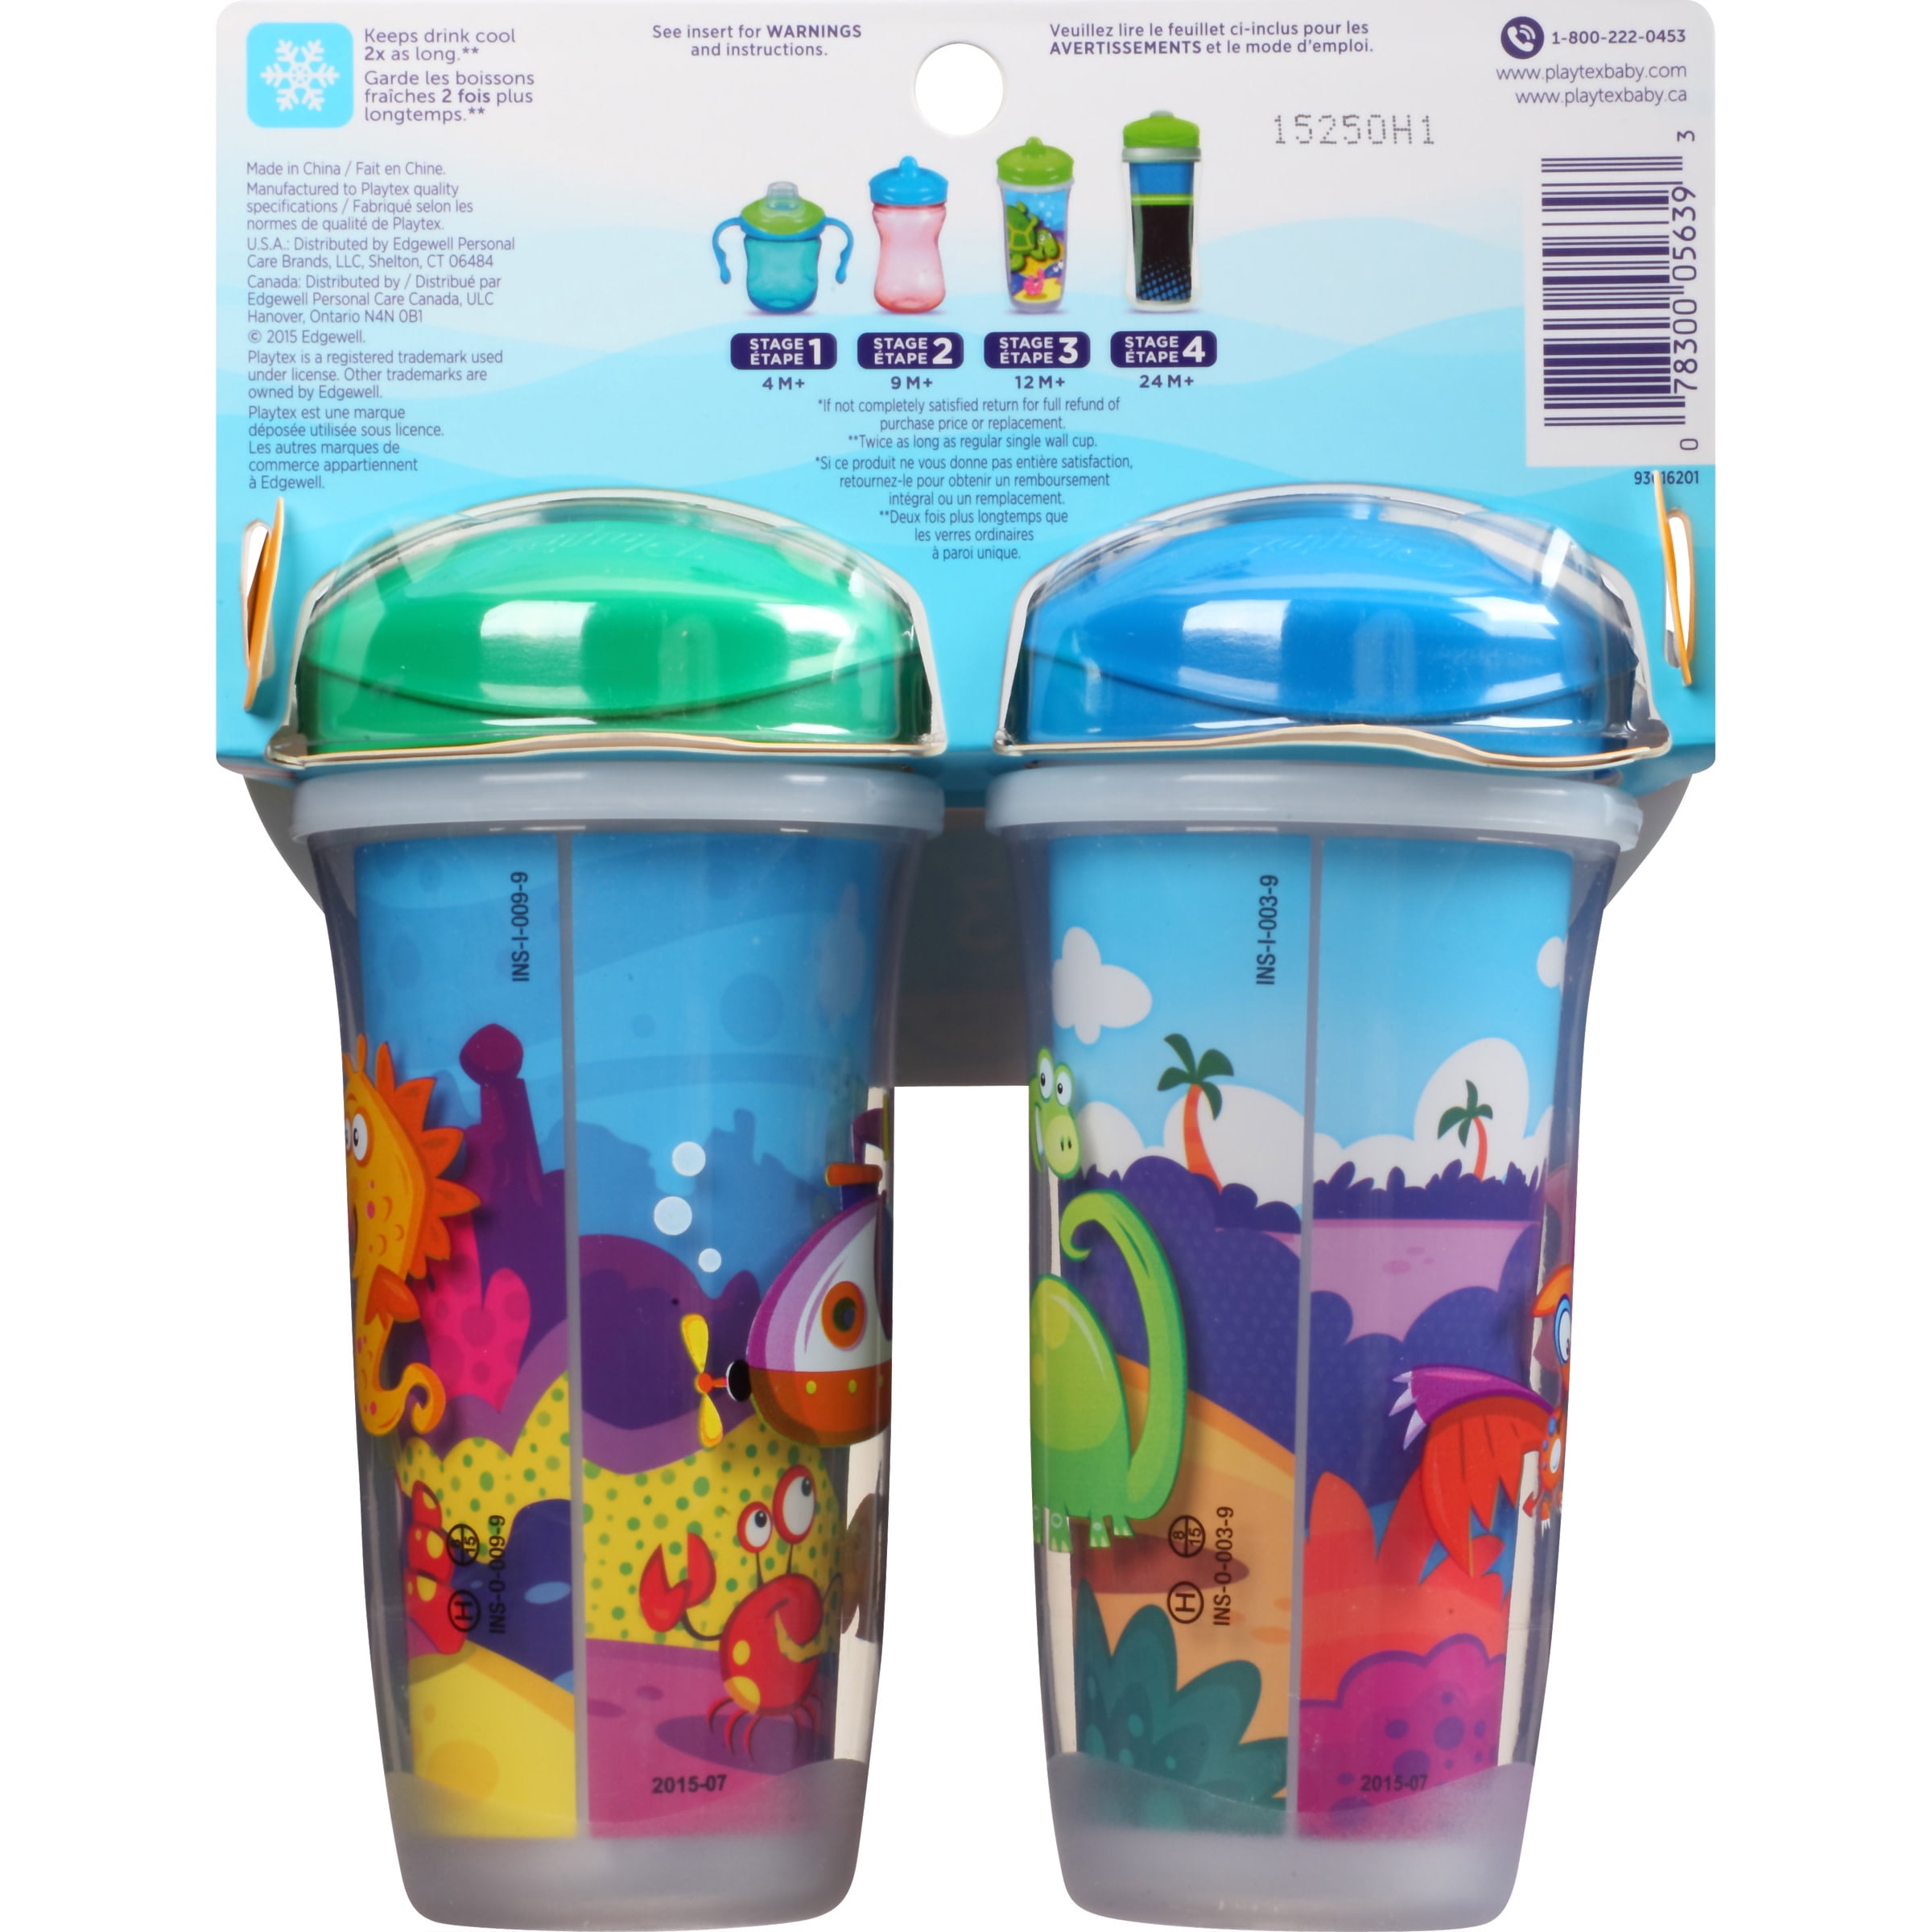 Playtex PlayTime 9 OZ Insulated Spill-Proof Cups, Assorted Colors